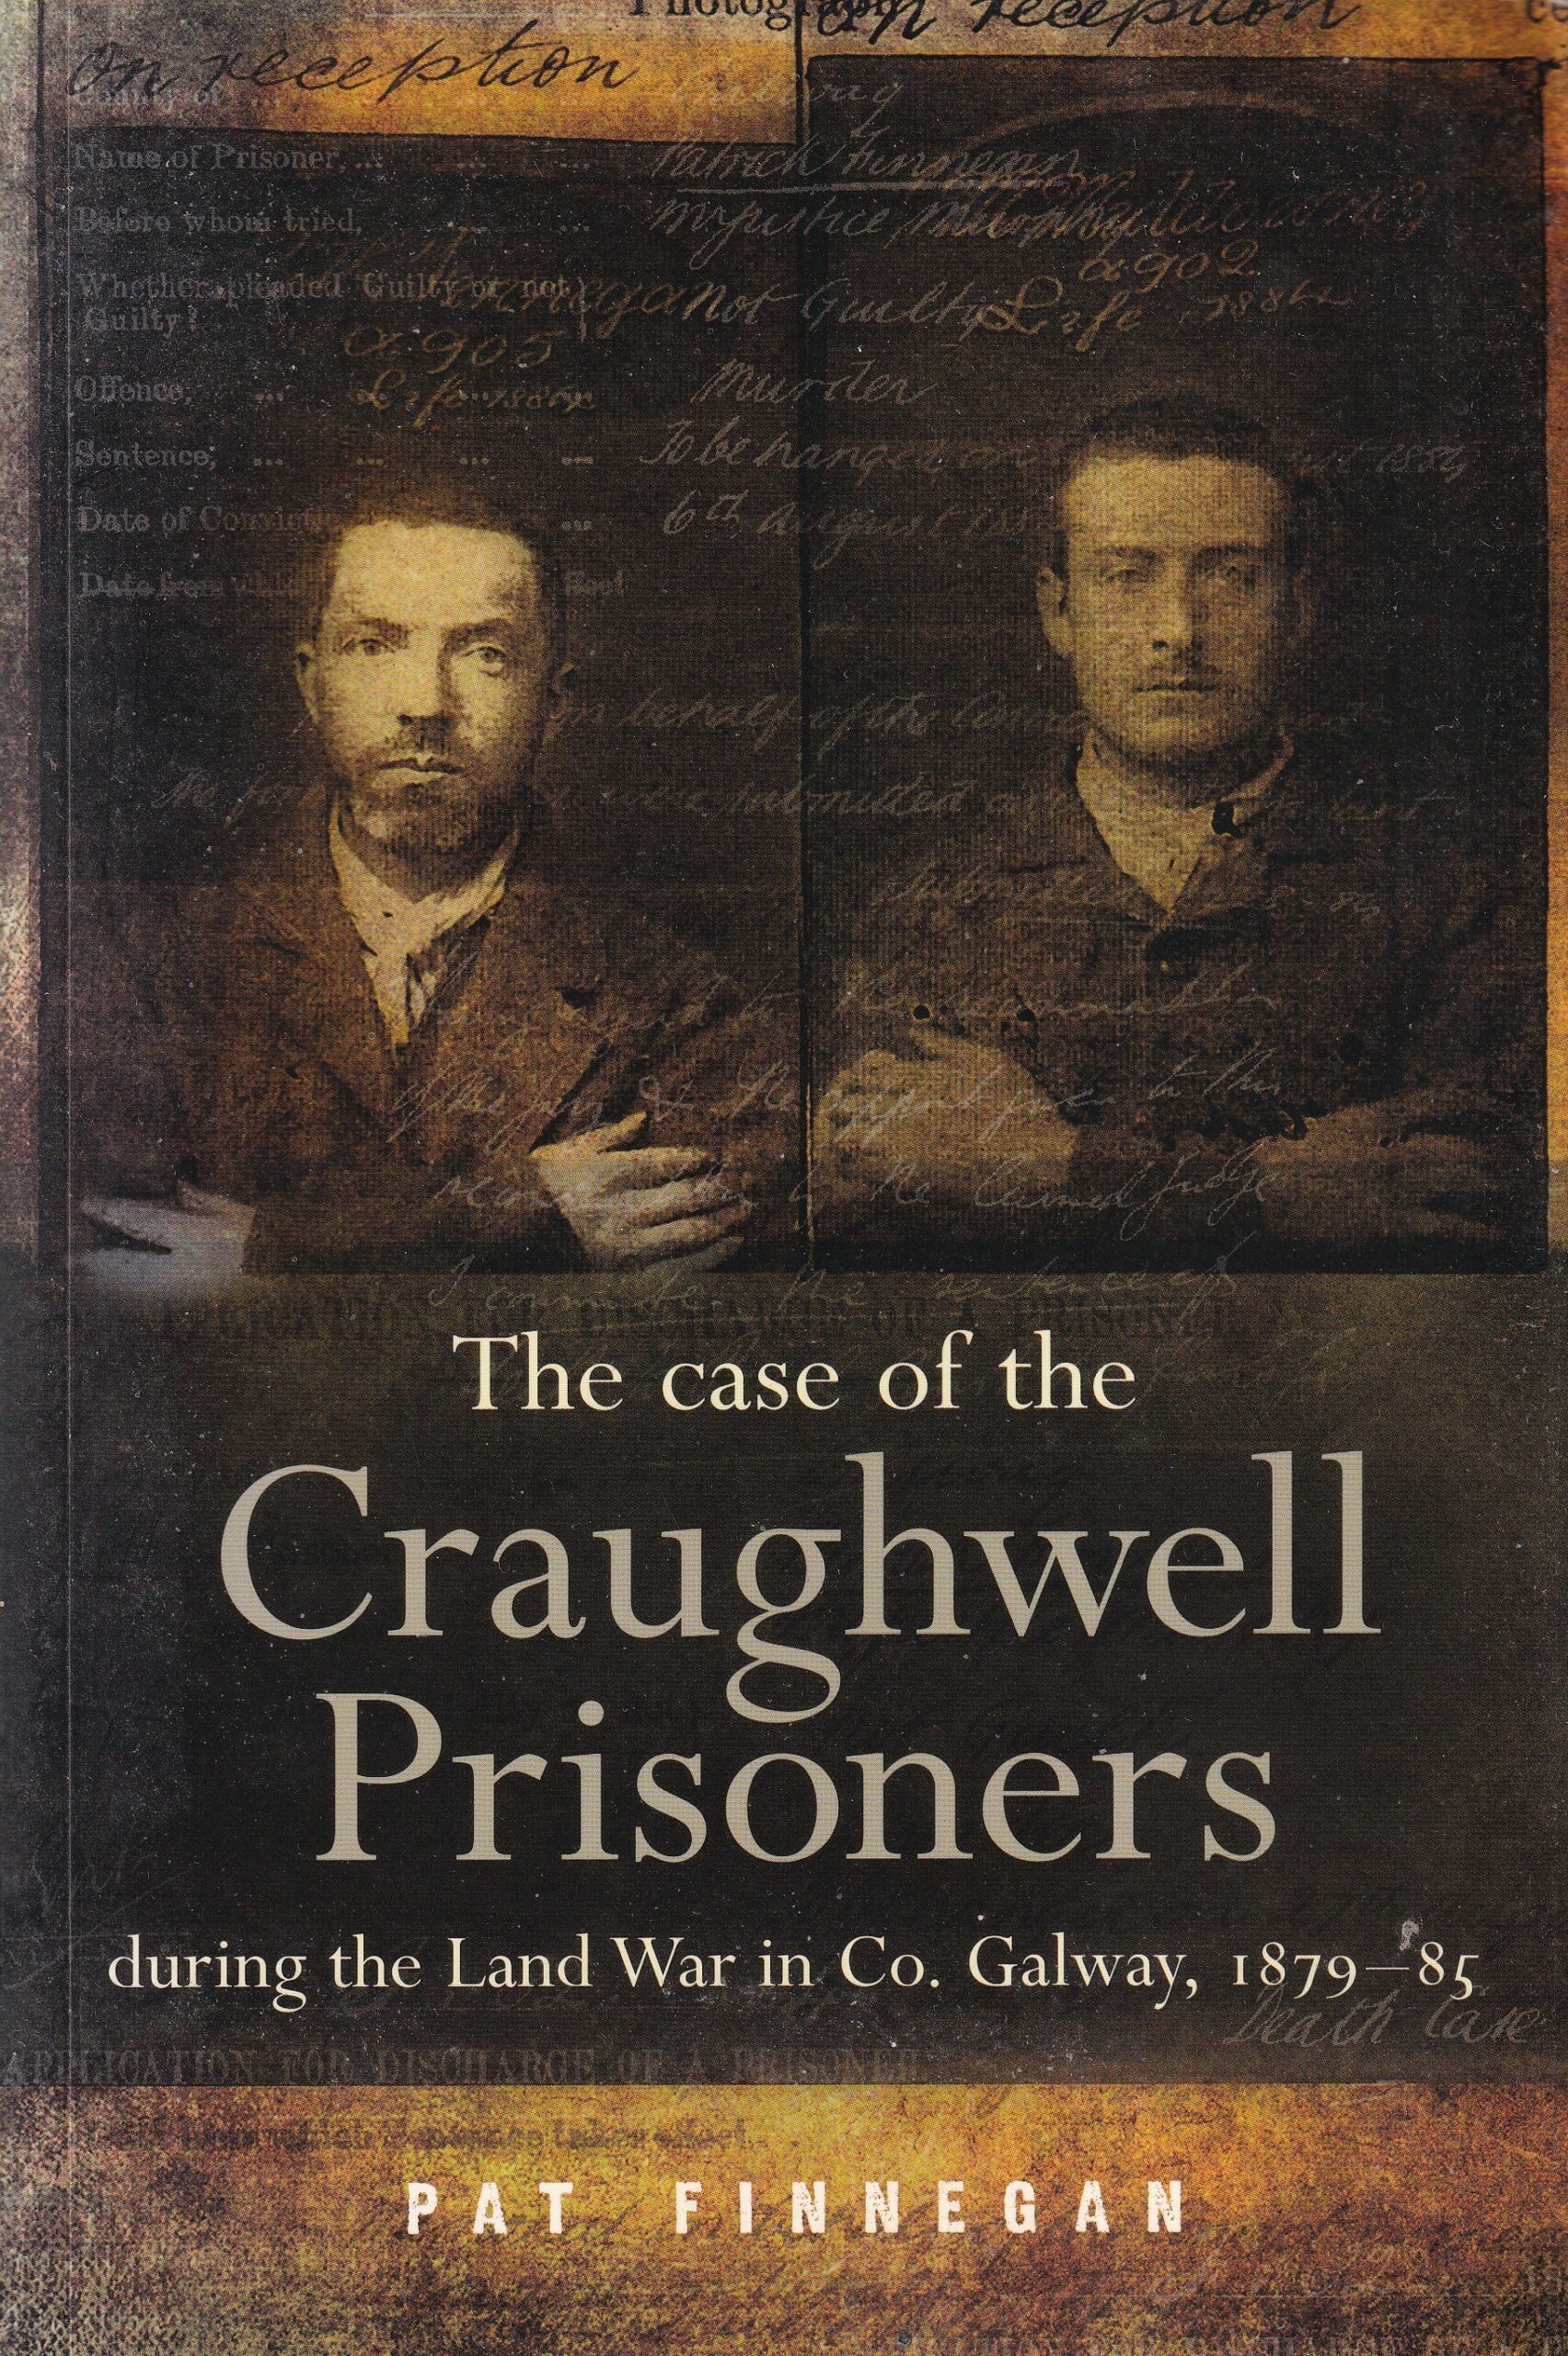 The Case of the Craughwell Prisoners During the Land War in Co. Galway, 1879-85- Signed | Pat Finnegan | Charlie Byrne's